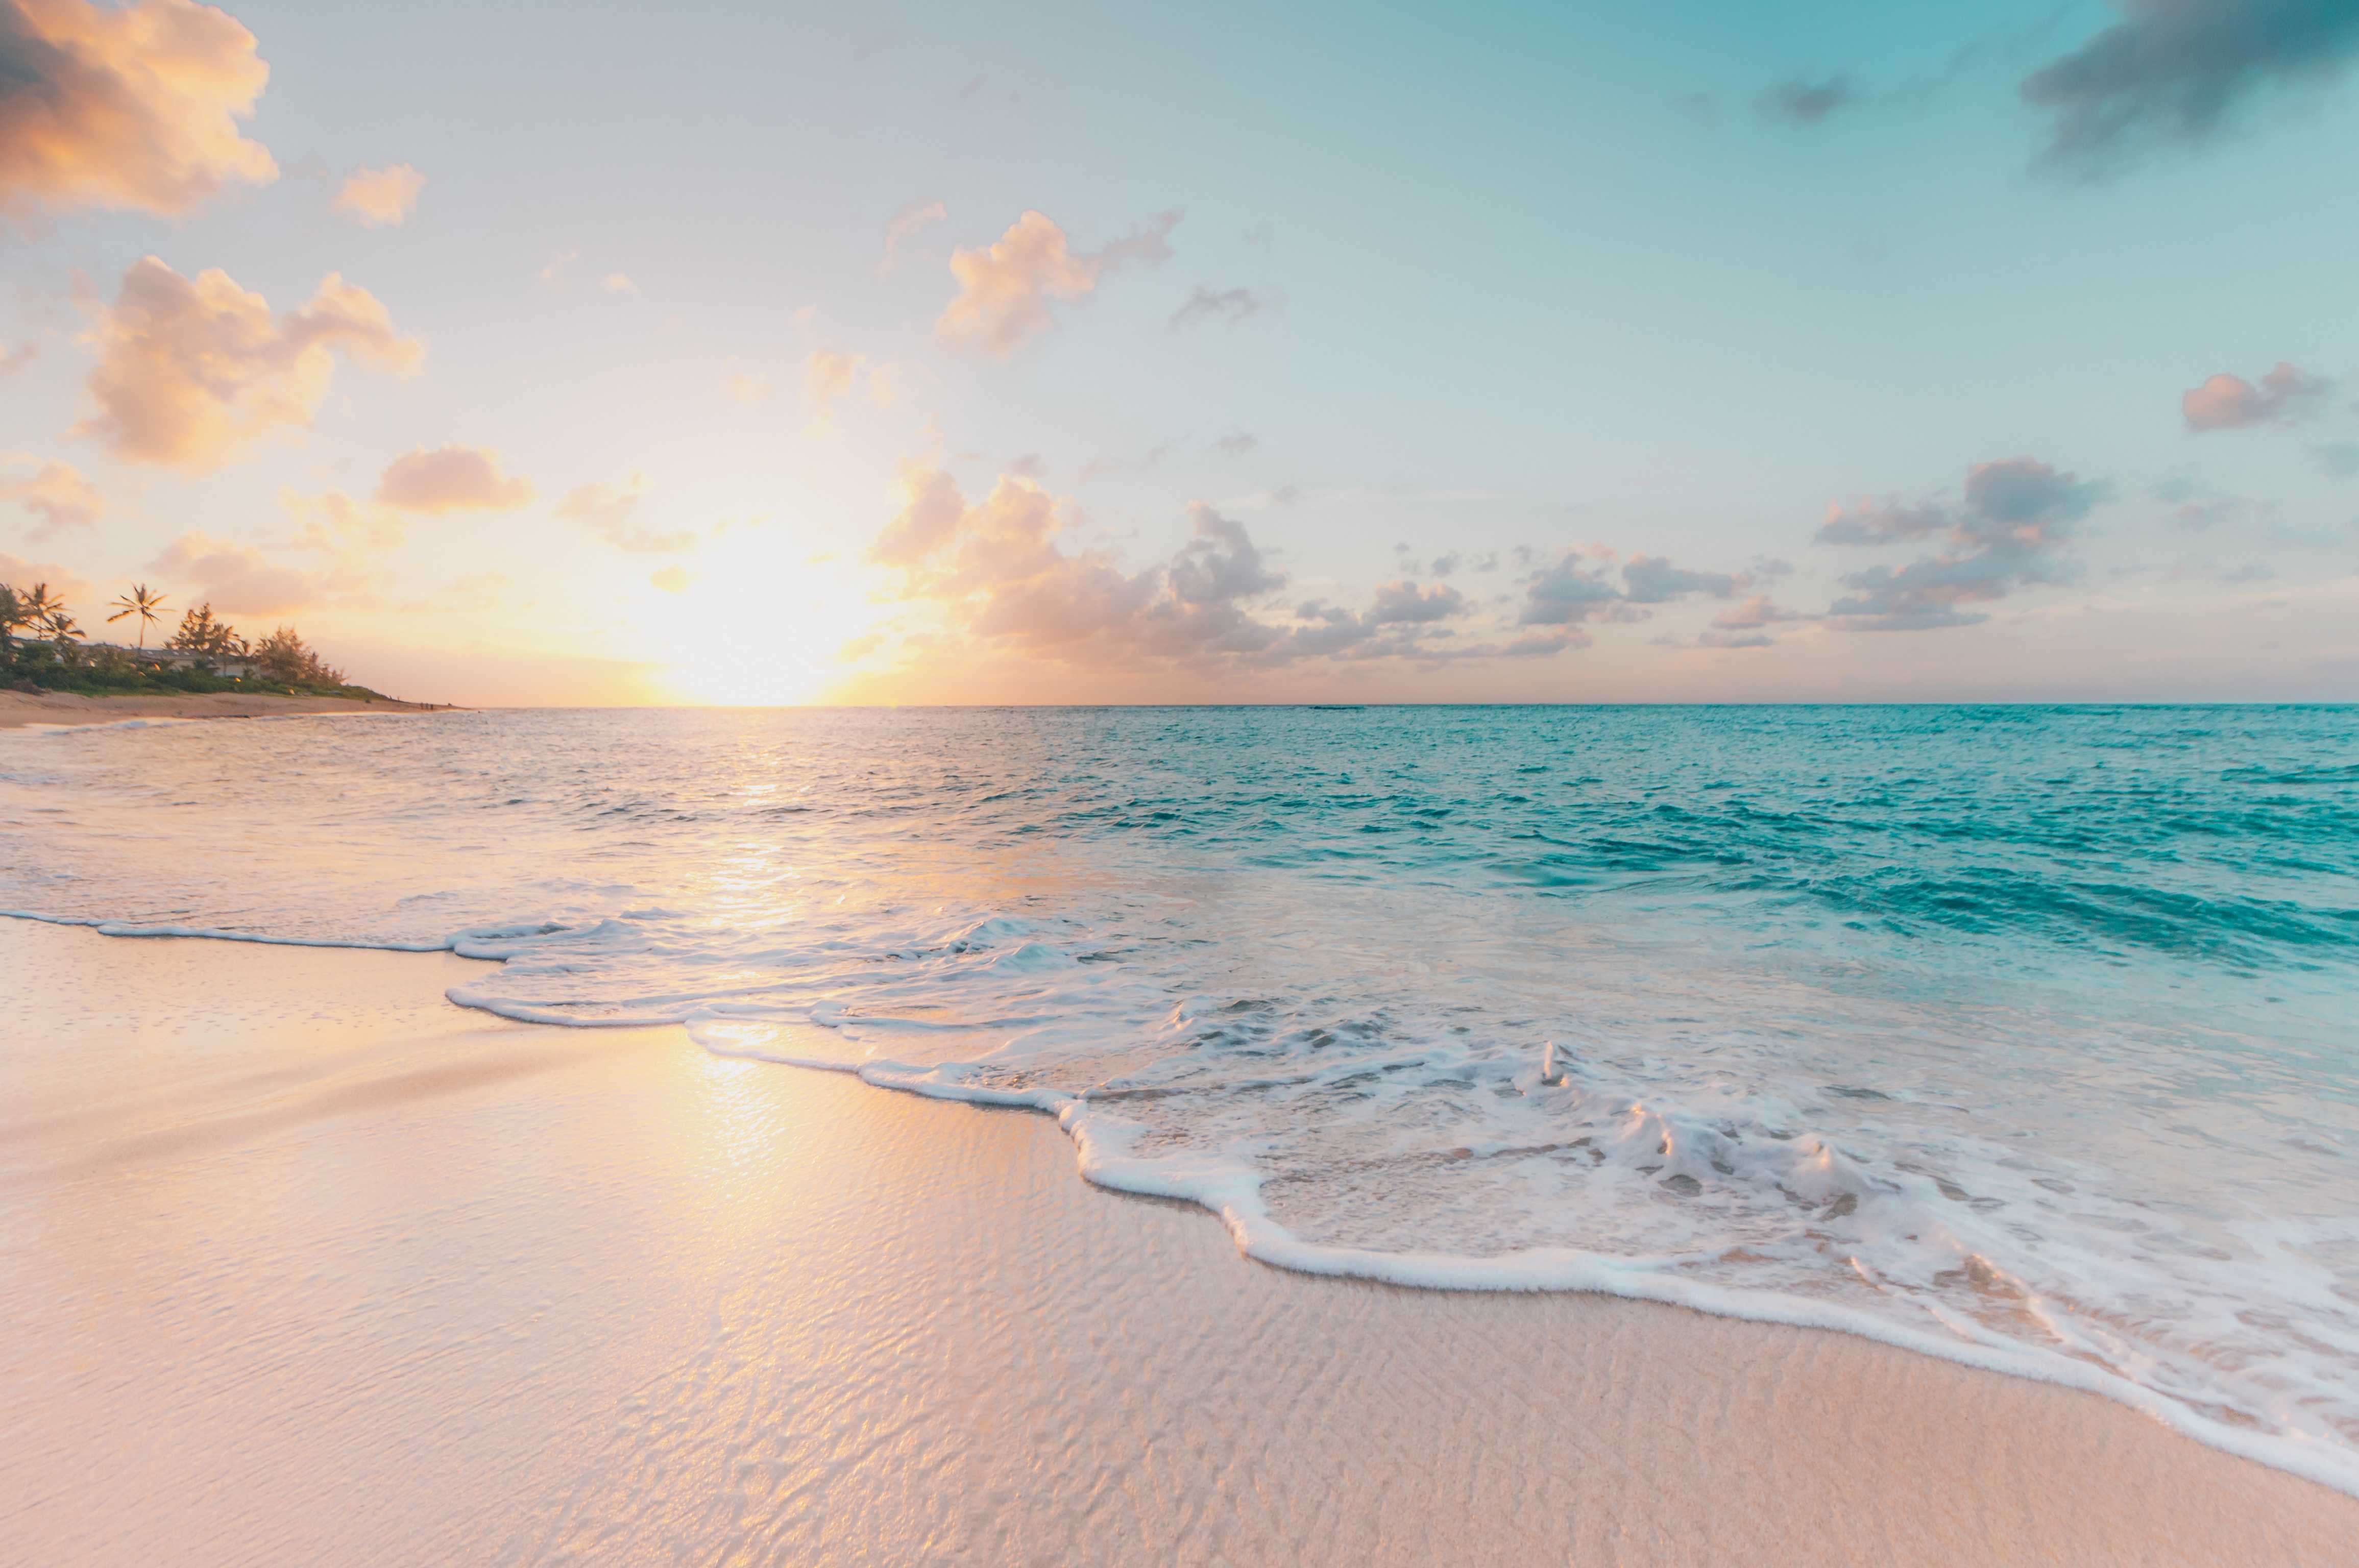 A photo of a sunset on the beach in Oahu, Hawaii.  There is pale, clean sand in the foreground and blue water in the background.  Photo by Sean Oulashin on Unsplash.